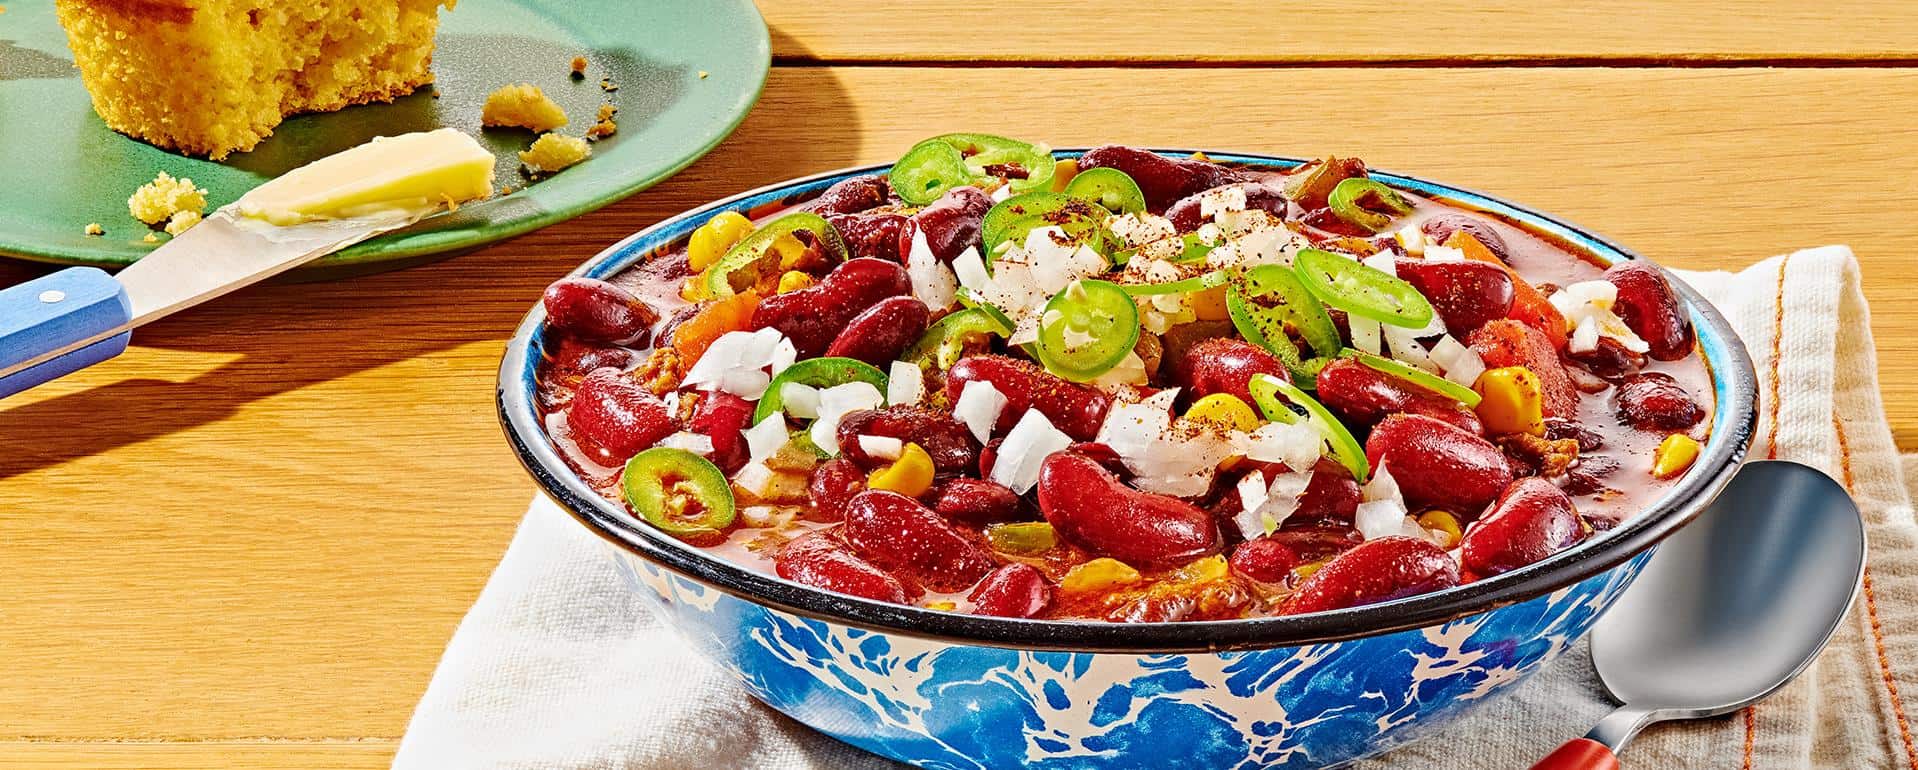 Satisfy Your Hunger with Bush’s Hearty Chili Recipe